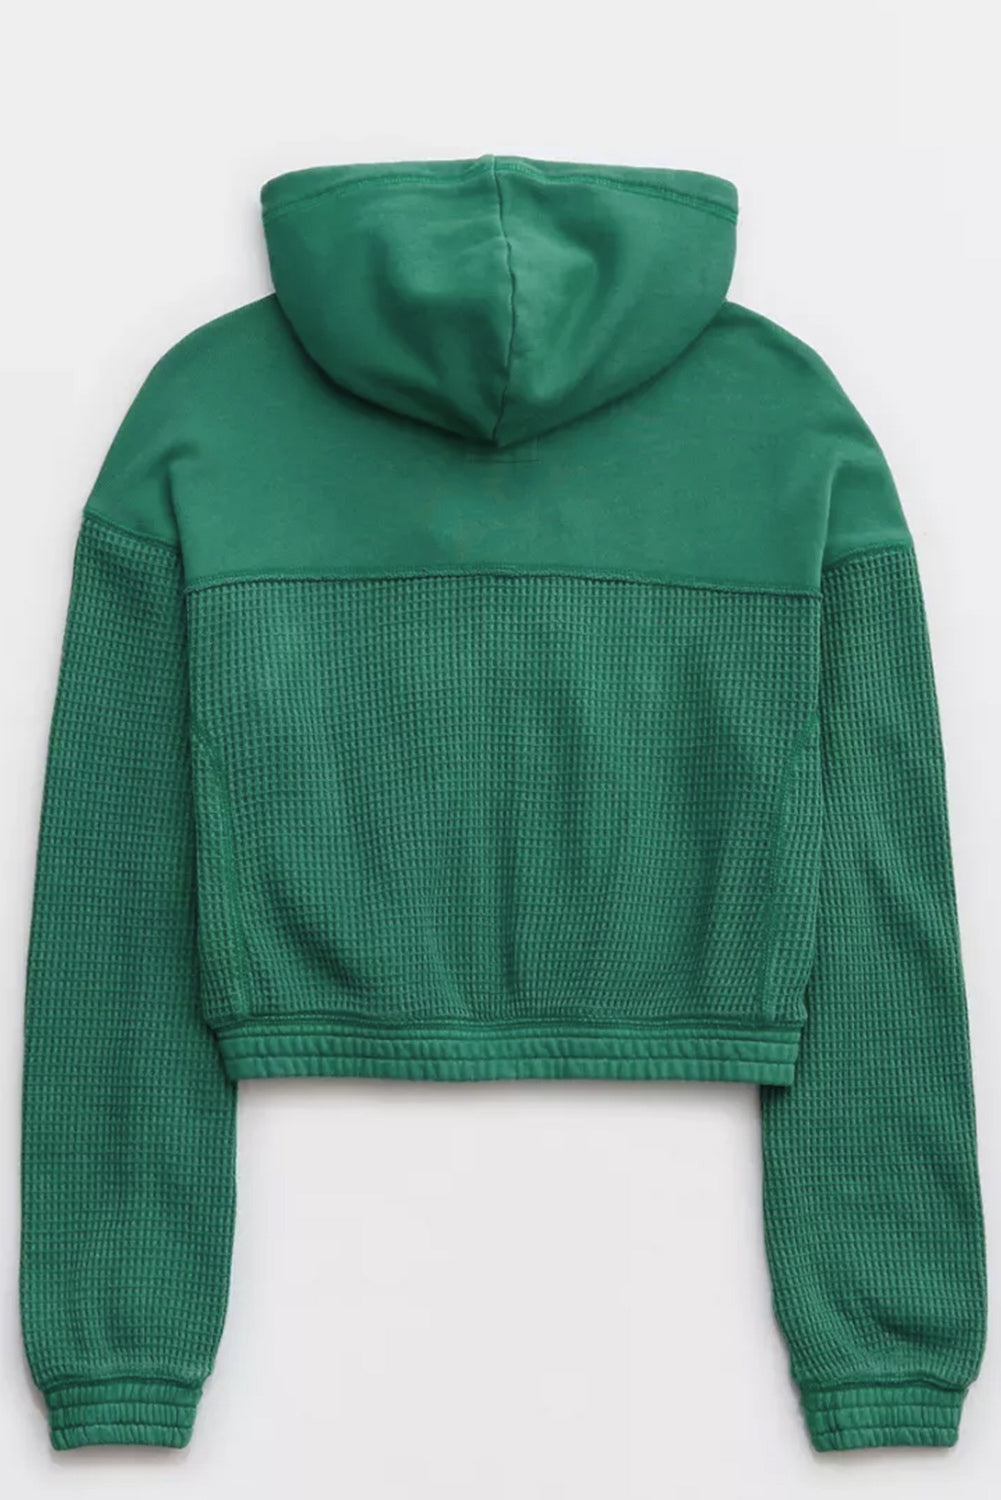 Green Waffle Hooded Shorts Outfit